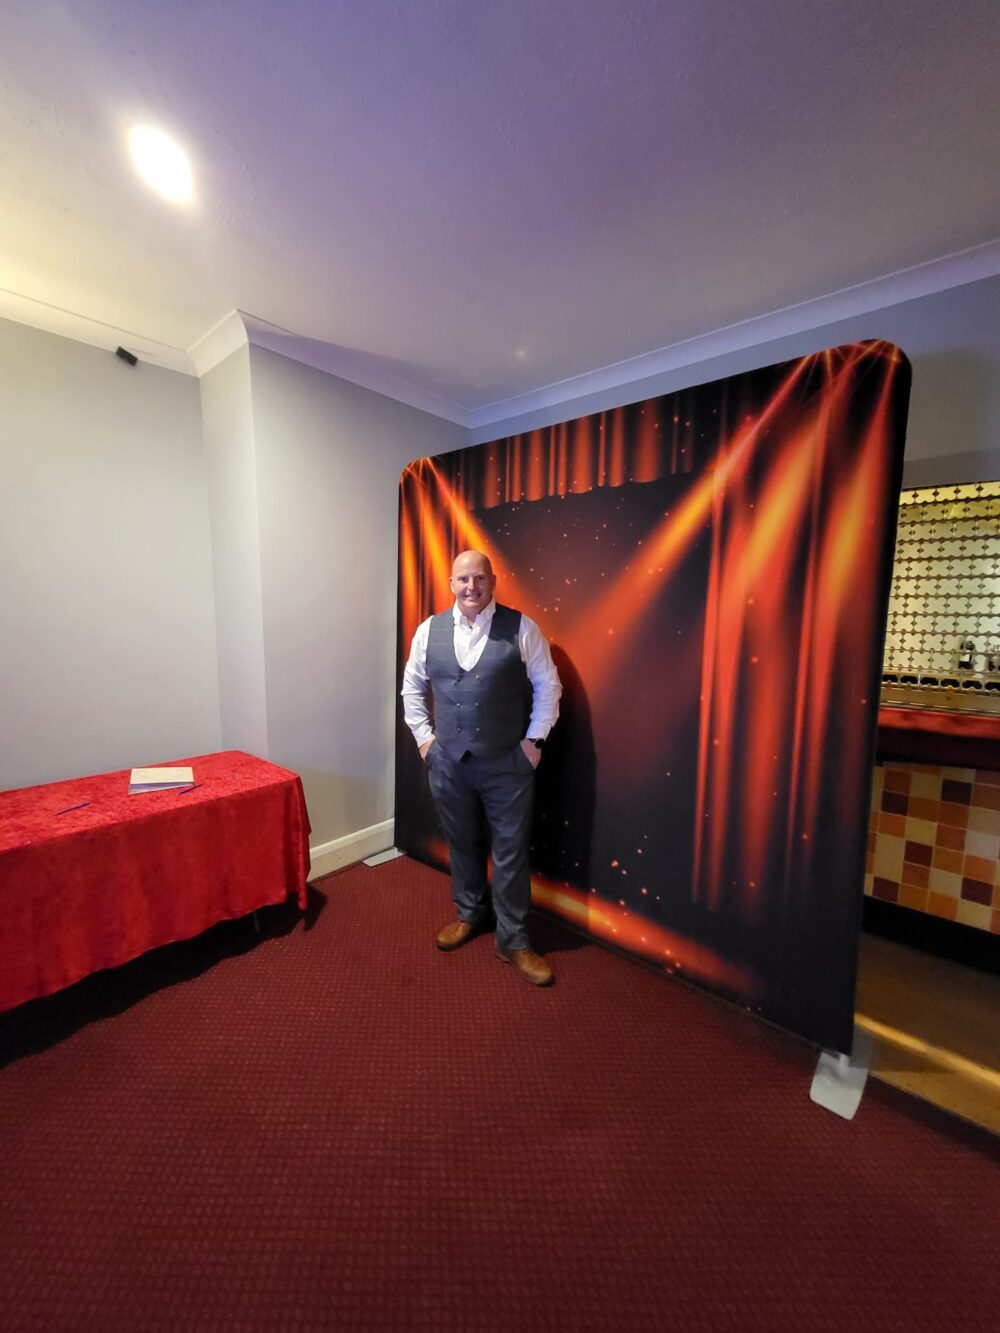 heart photo booth hire kent, photo booth backdrop, photo booth hire